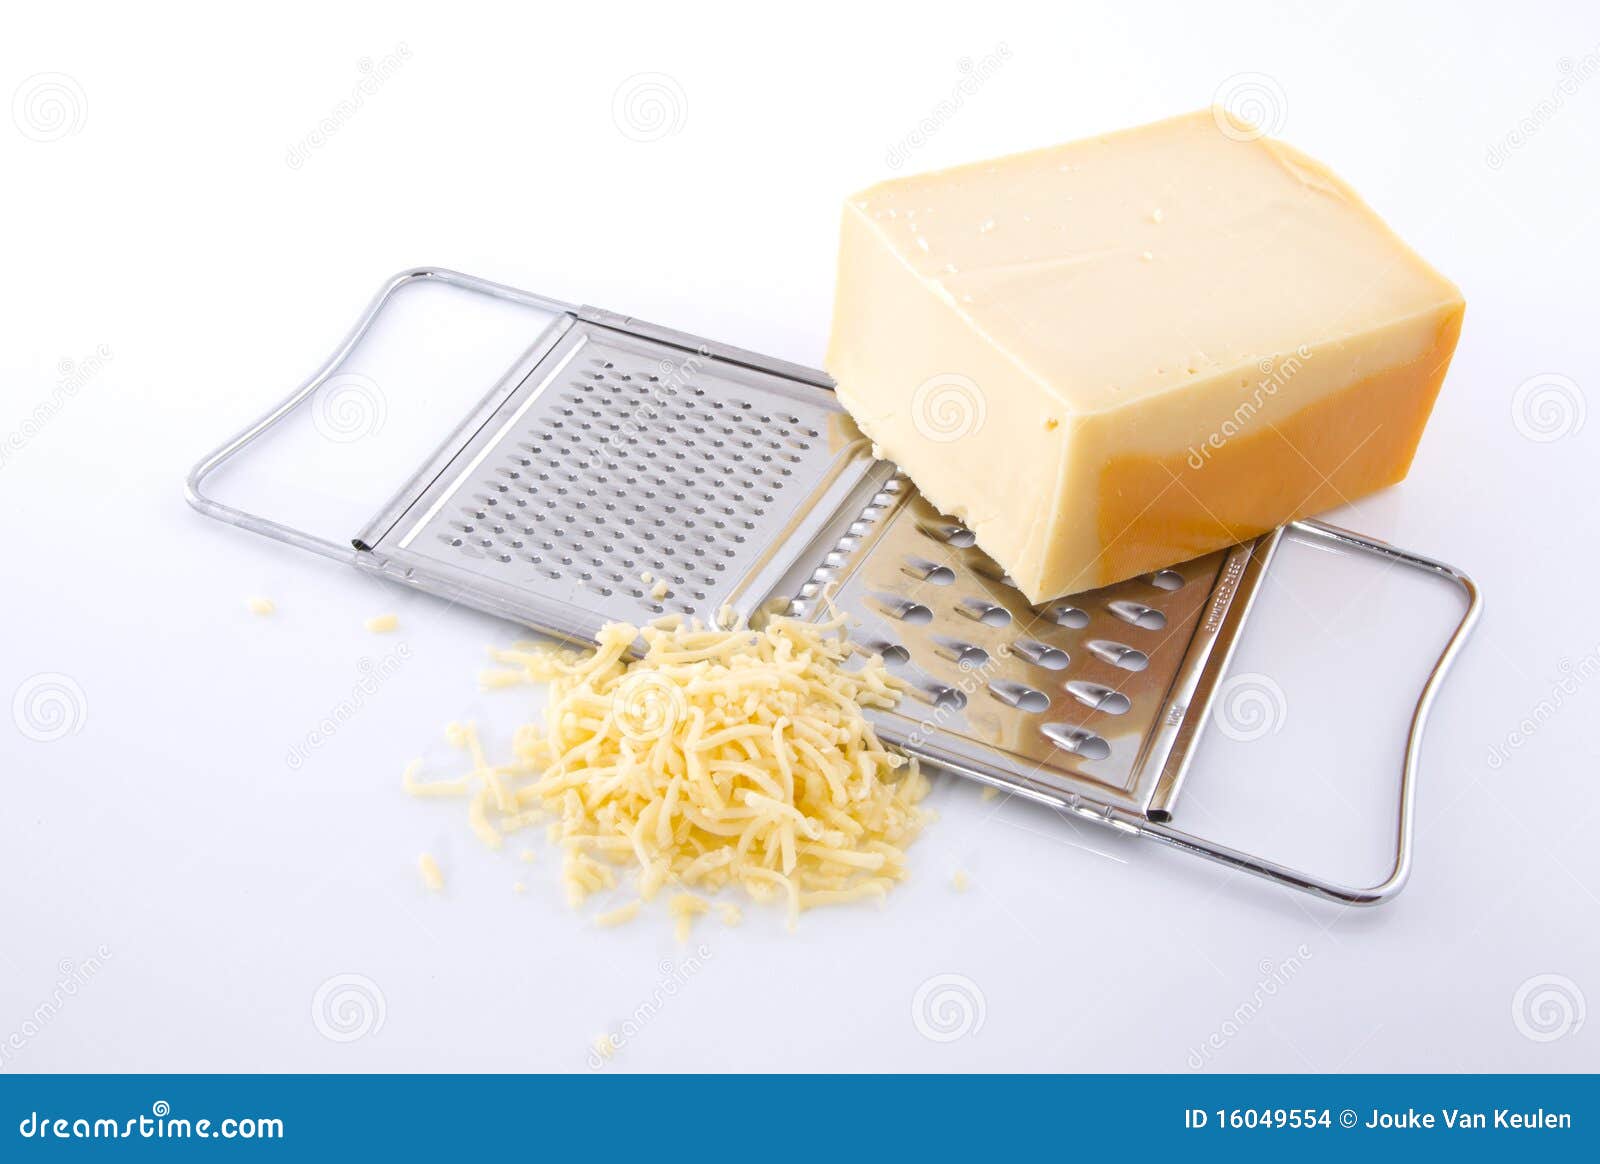 https://thumbs.dreamstime.com/z/grater-cheese-16049554.jpg